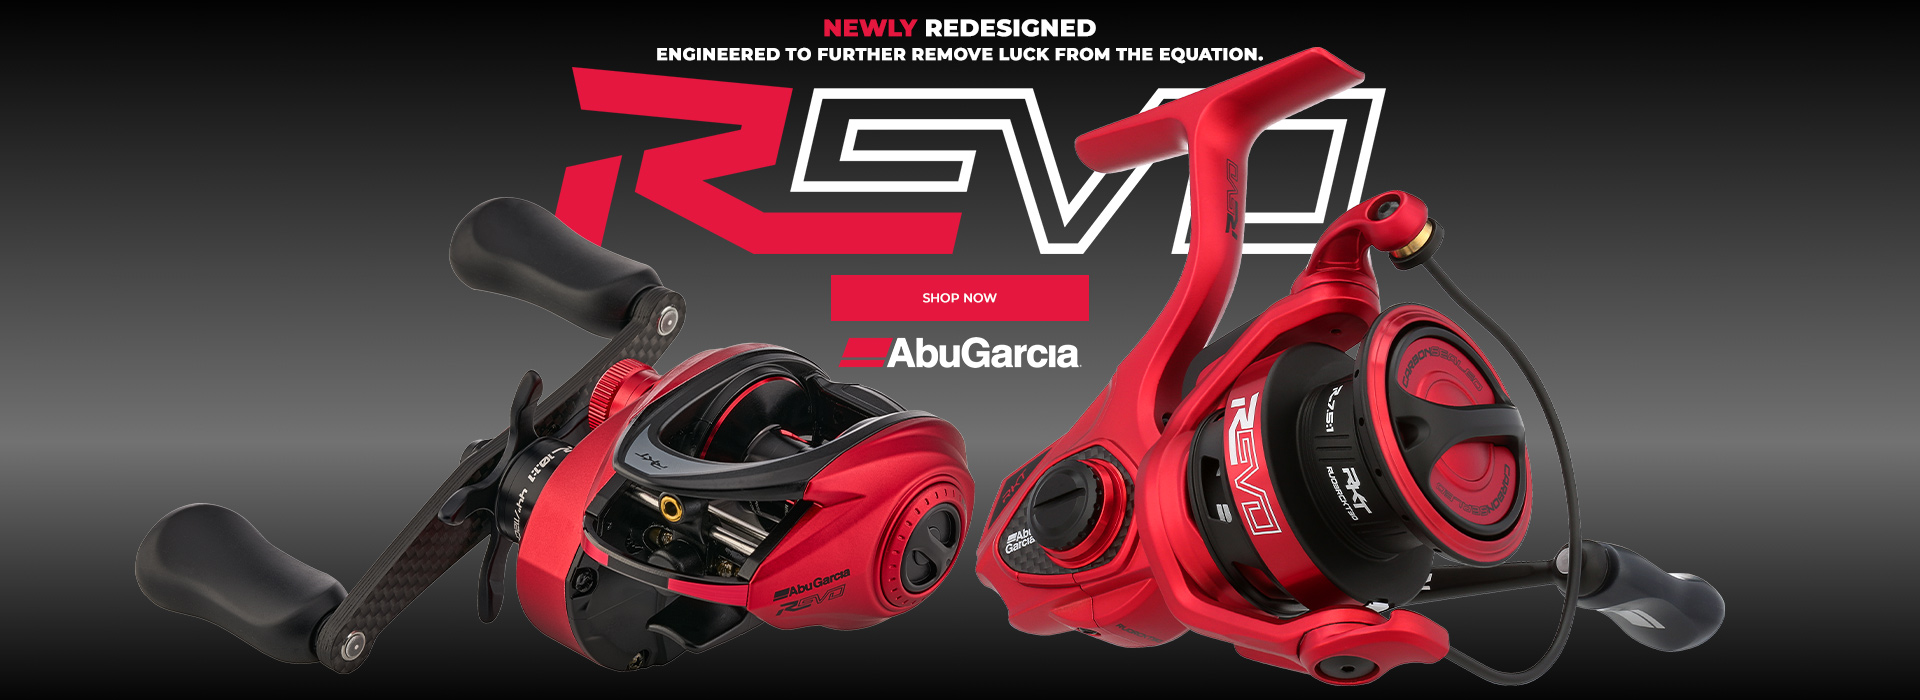 Introducing the next generation of Revo fishing reels